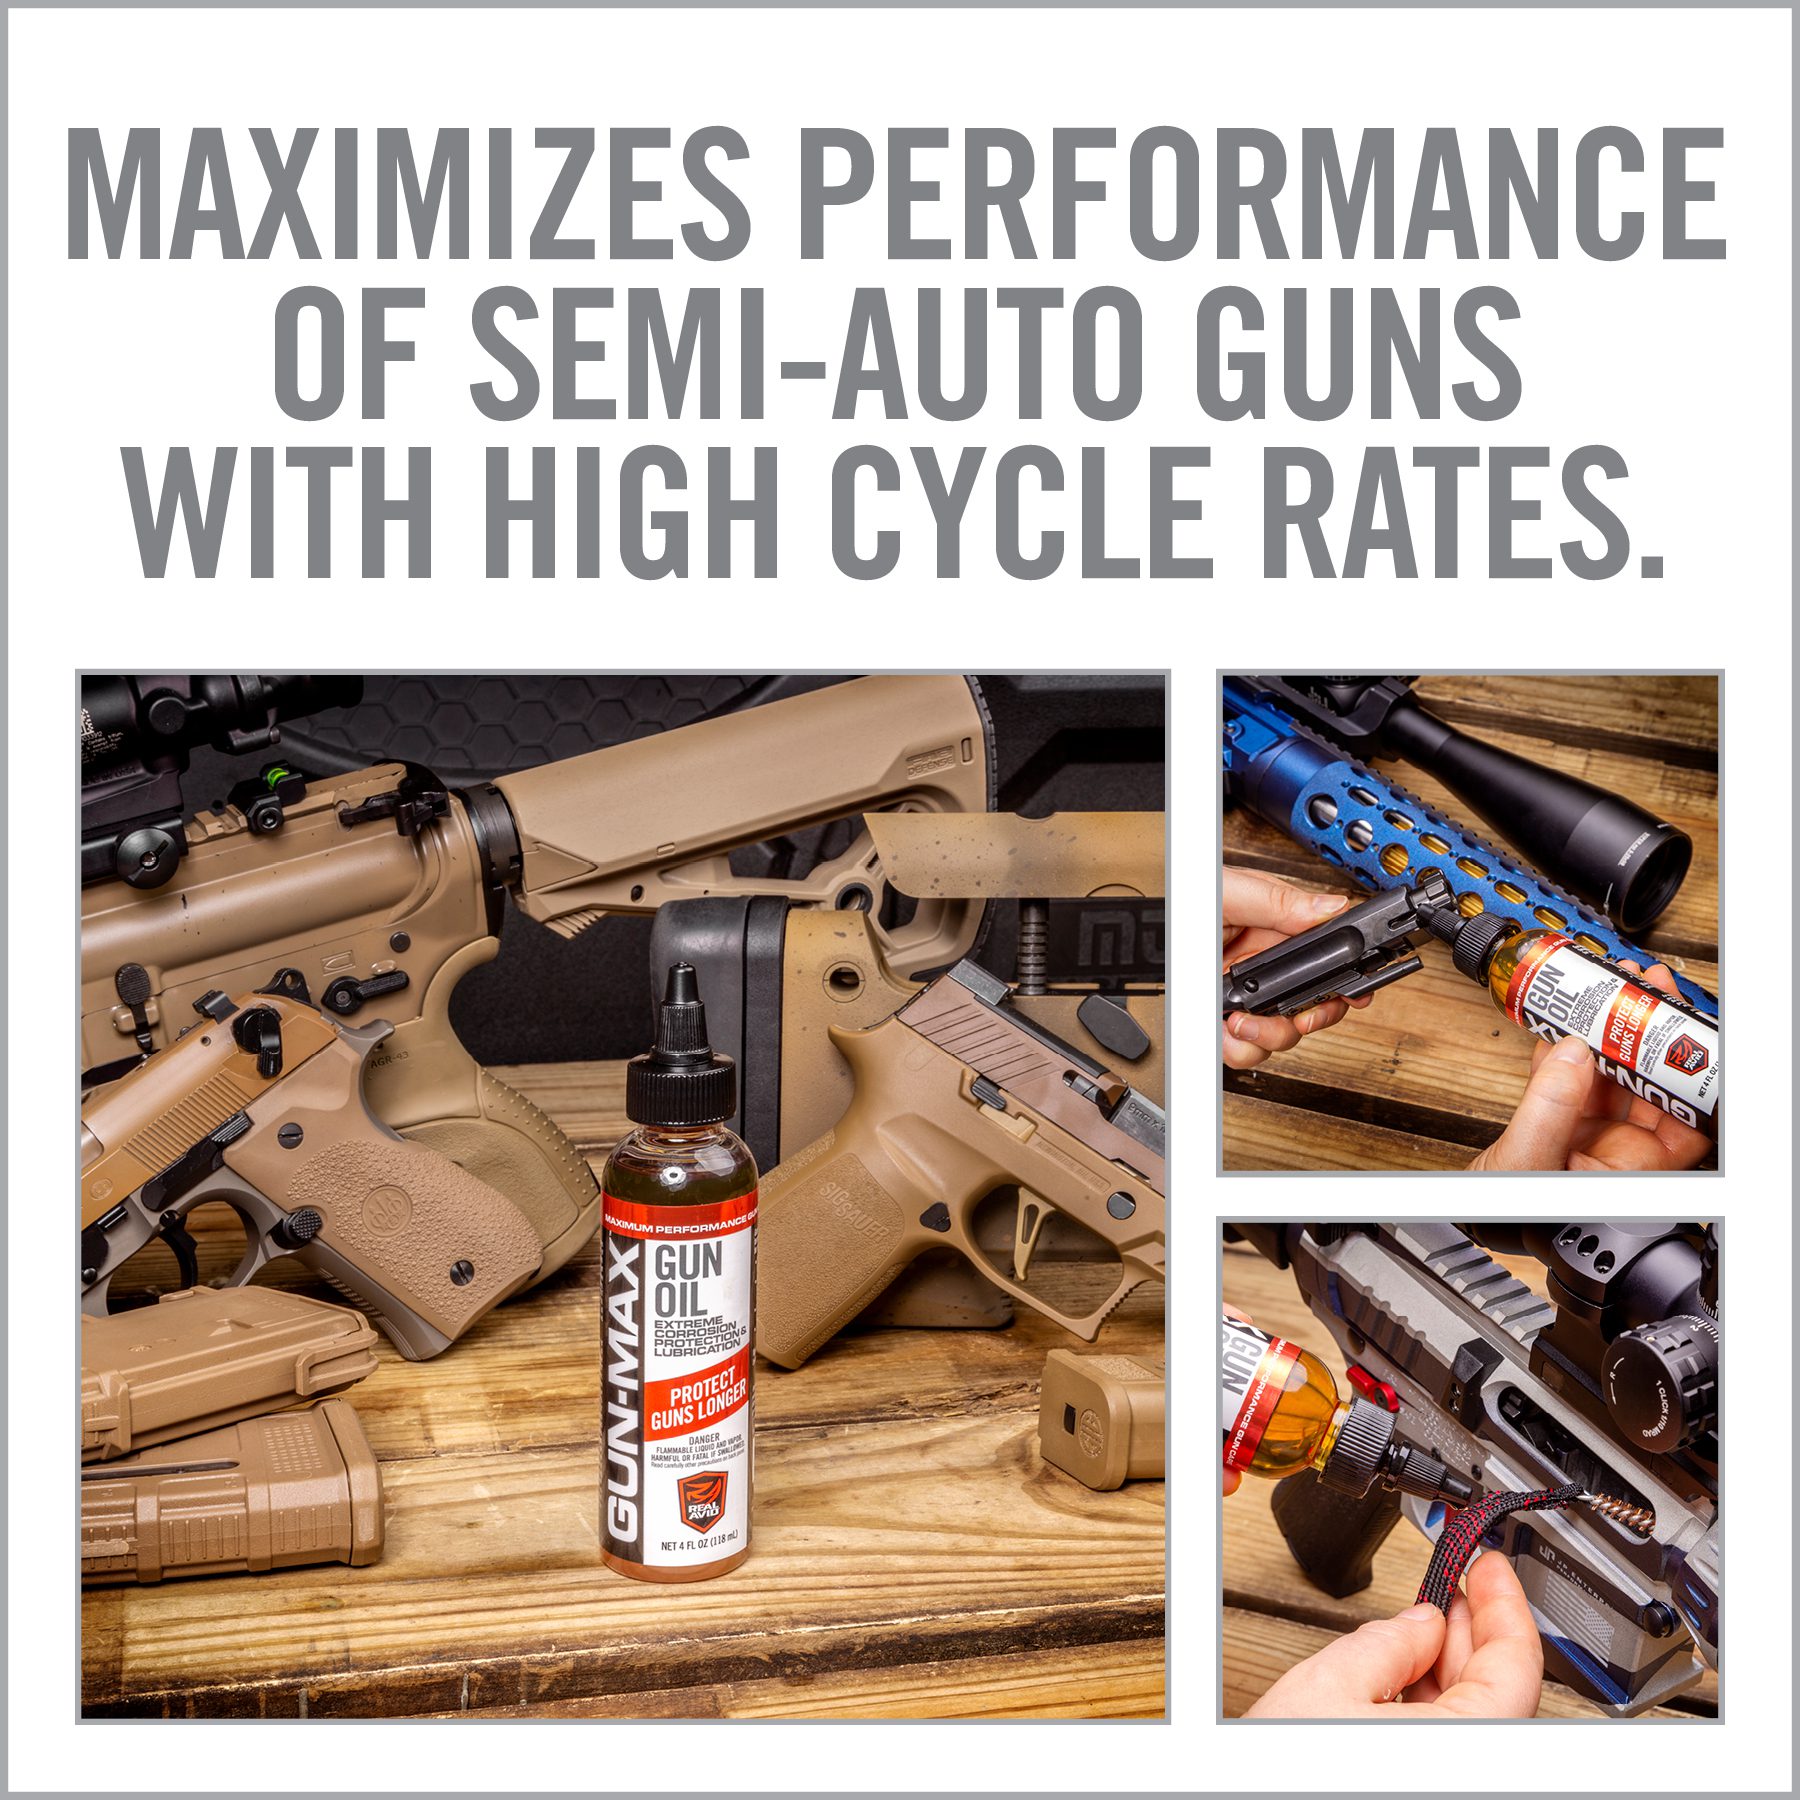 an ad for guns with high cycle rate